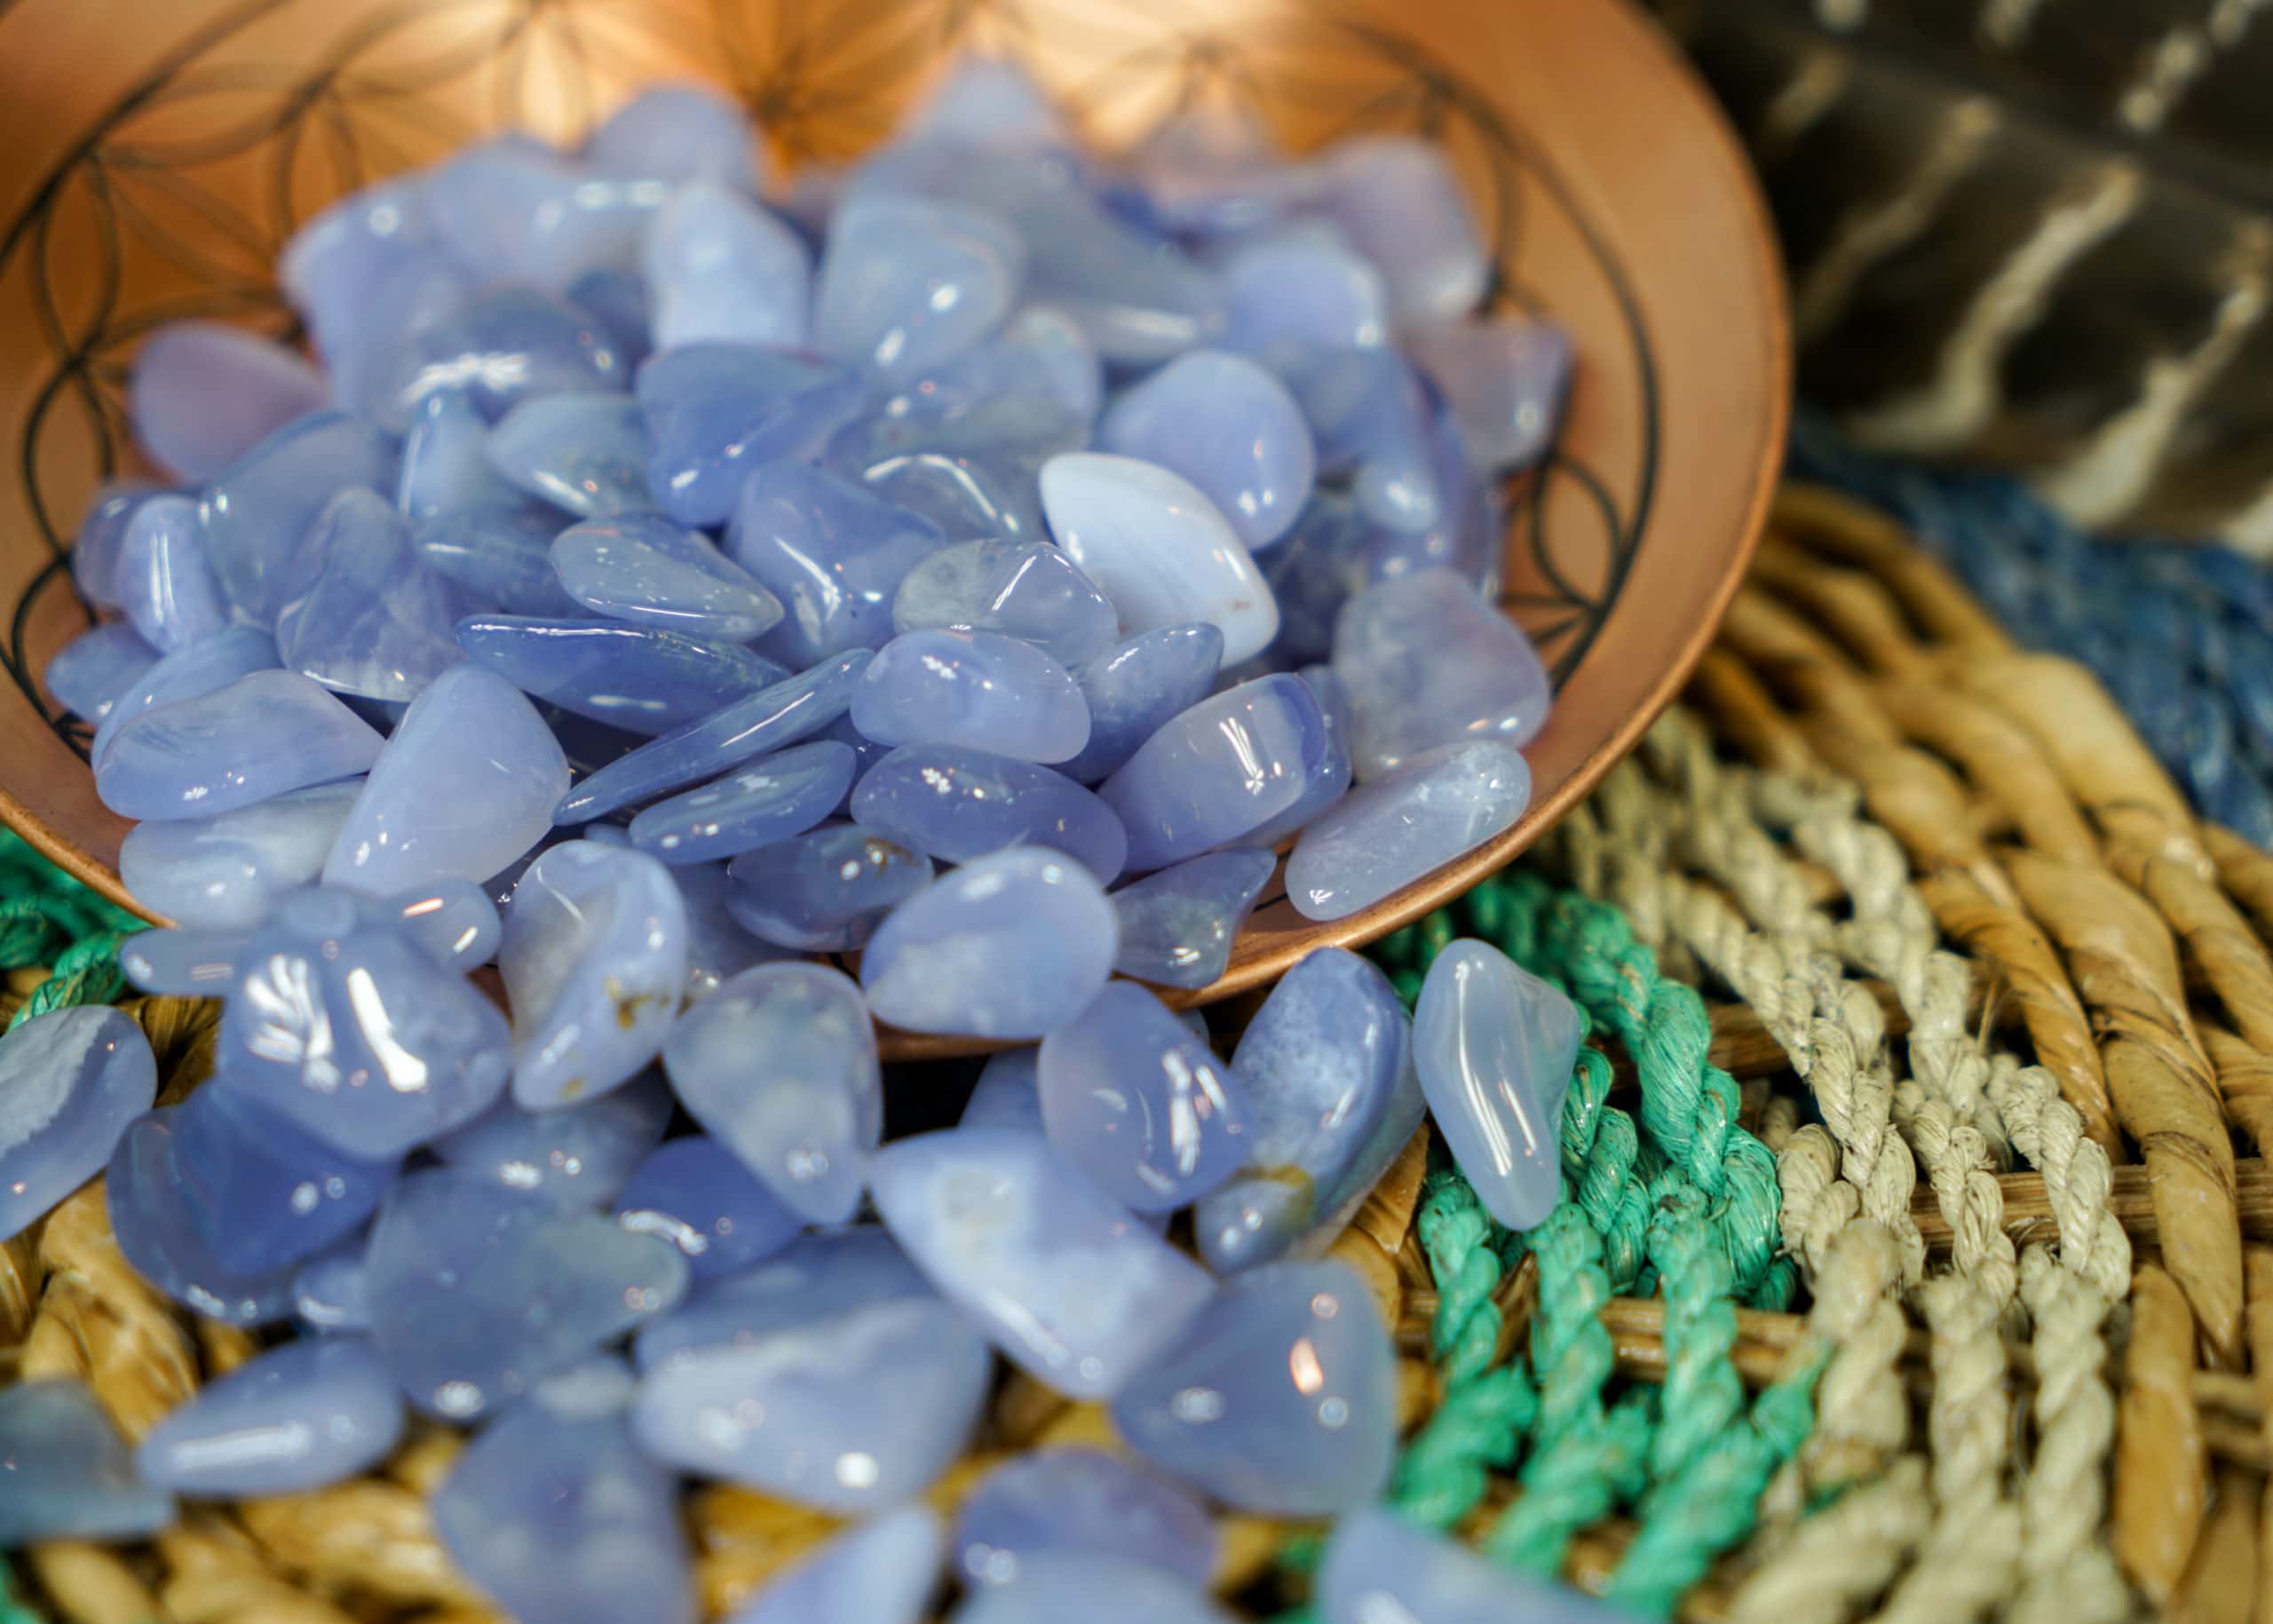 Healing Properties of Blue Chalcedony: A Crystal for Soothing & Support